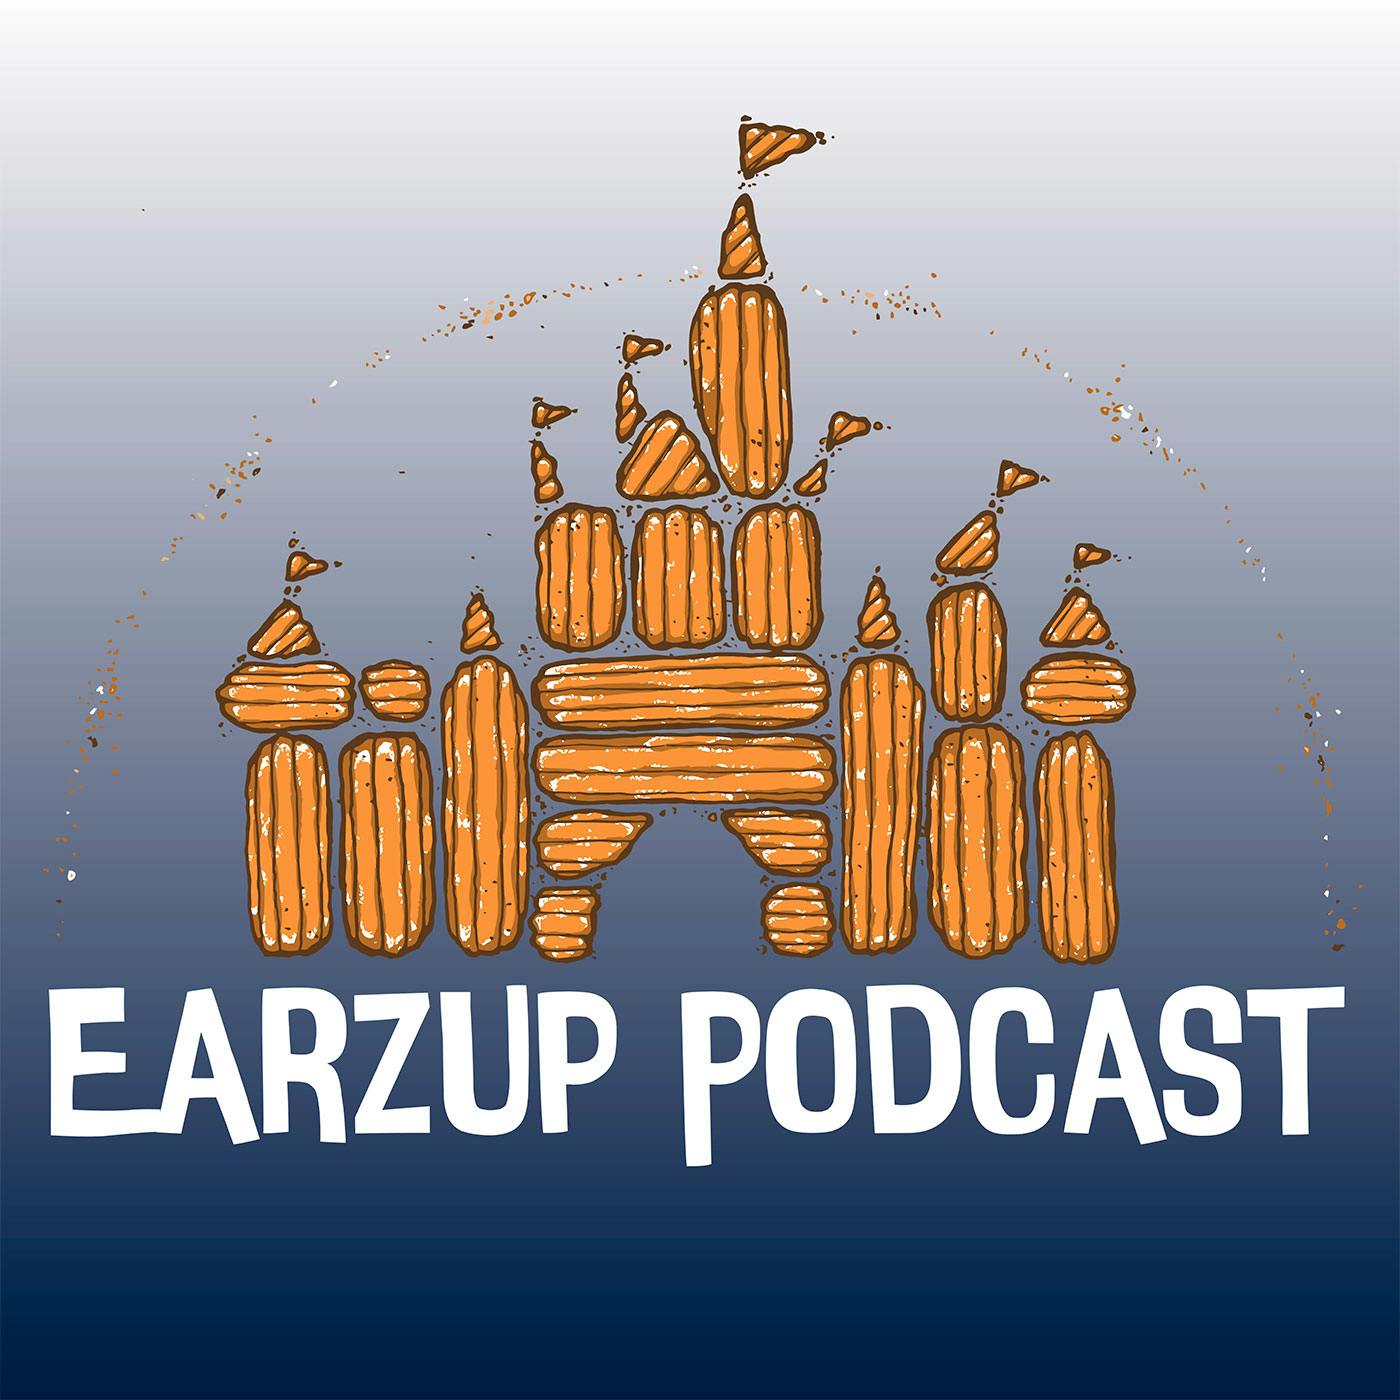 The EarzUp! 2019 Year in Review